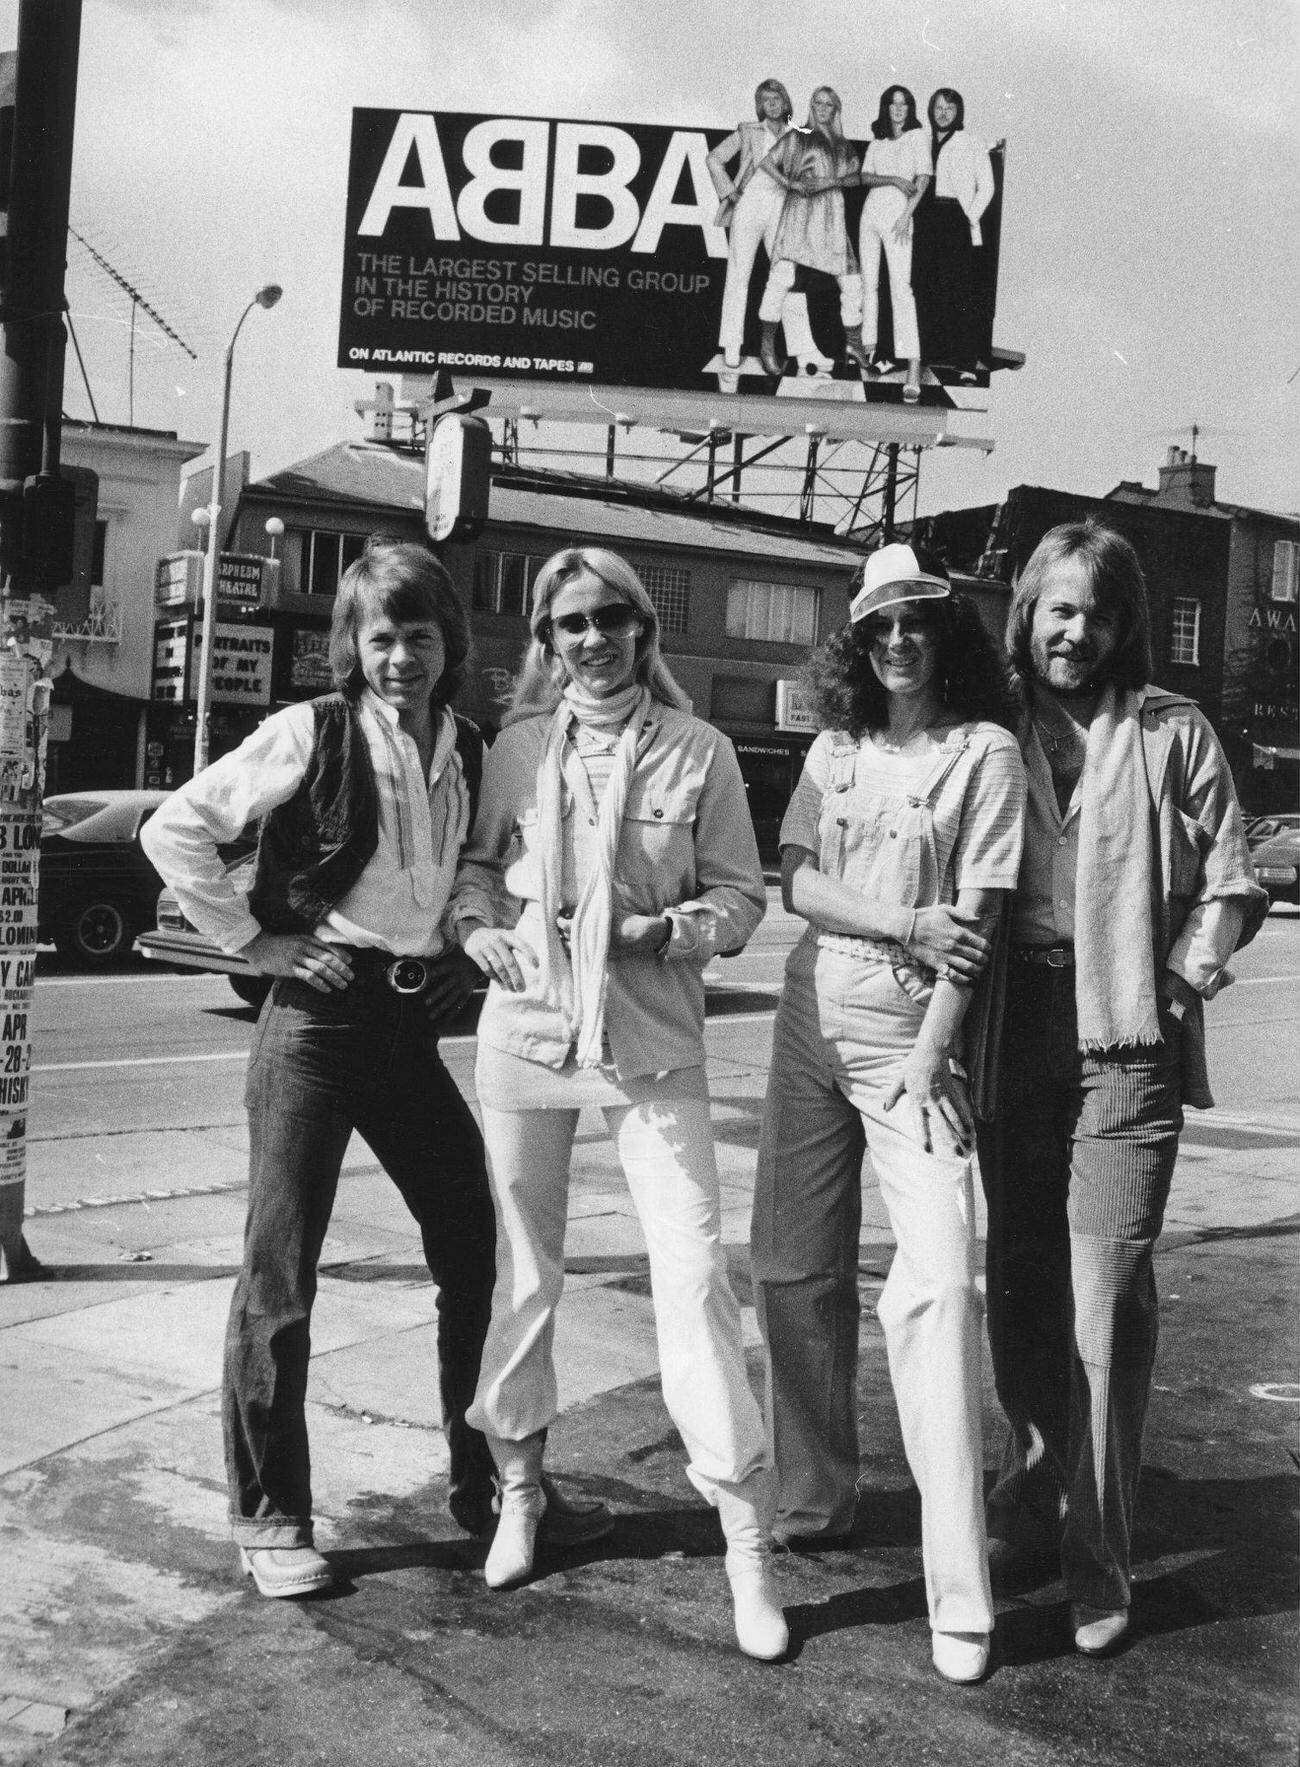 ABBA, from left to right: Björn Ulvaeus; Agnetha Fältskog; Anni-Frid Lyngstad and Benny Andersson in front of a 7 high Poster of themselves in Los Angeles, 1978